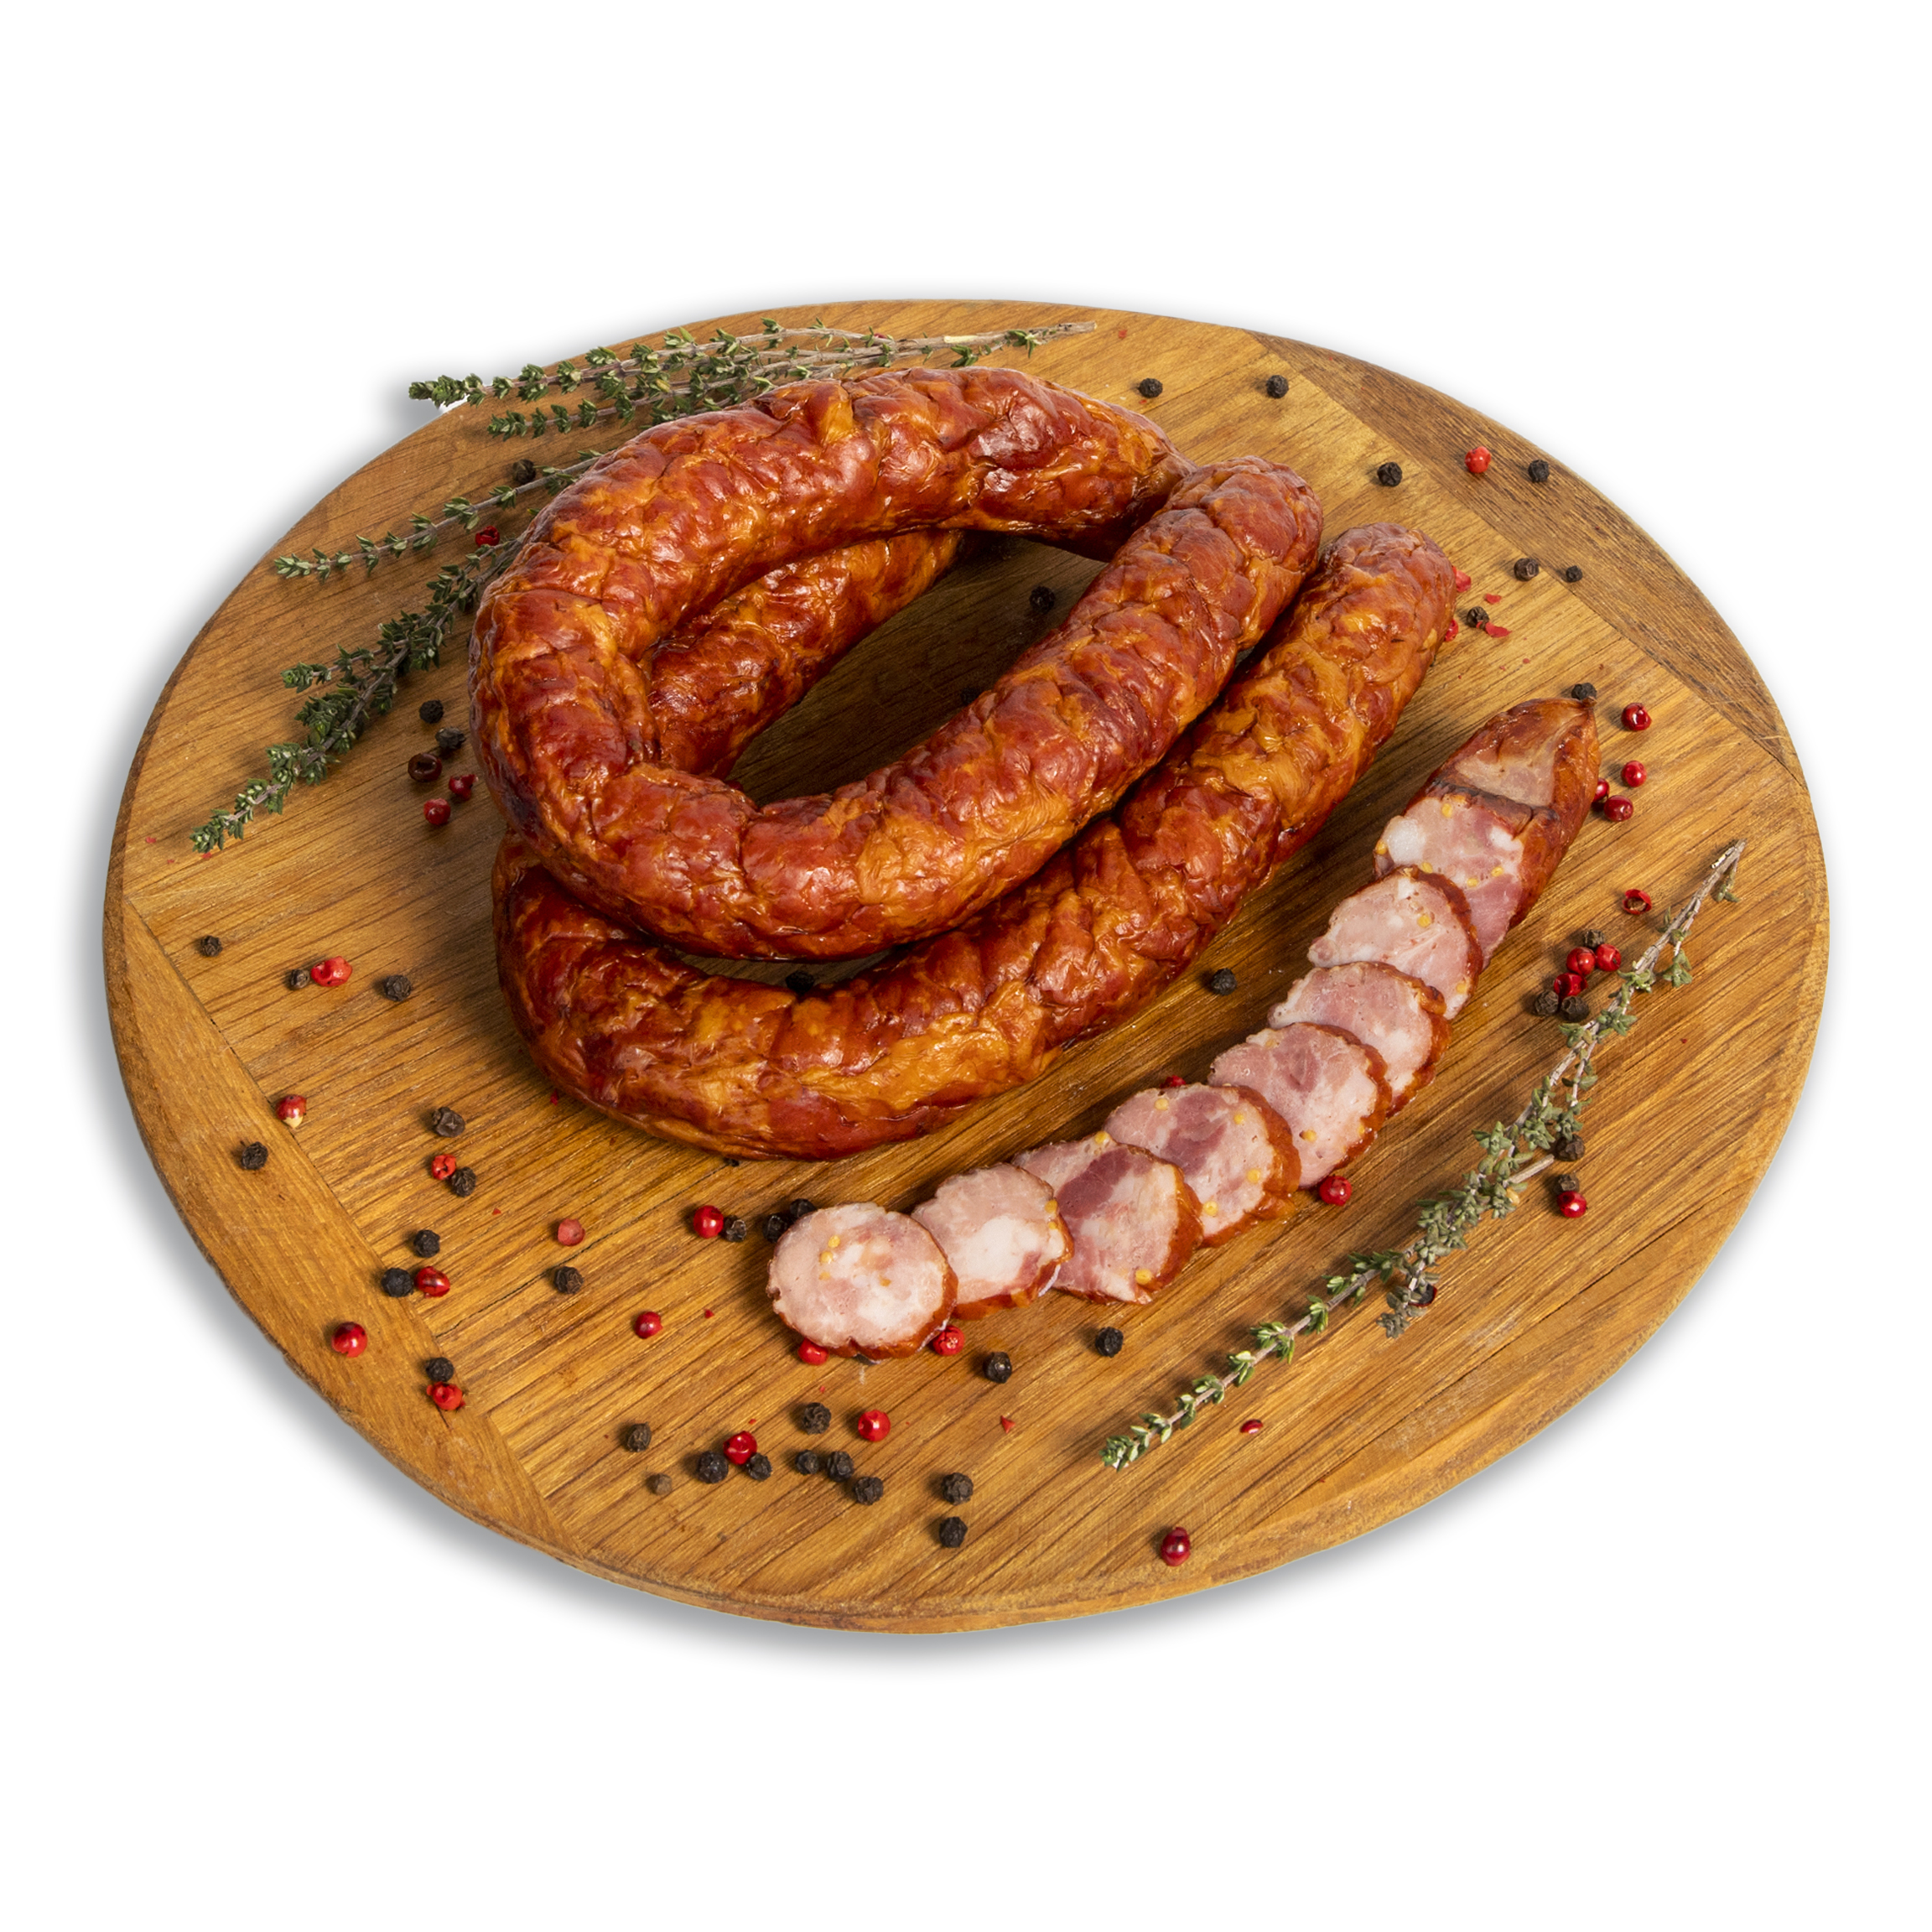 Homemade sausage with mustard smoked and baked